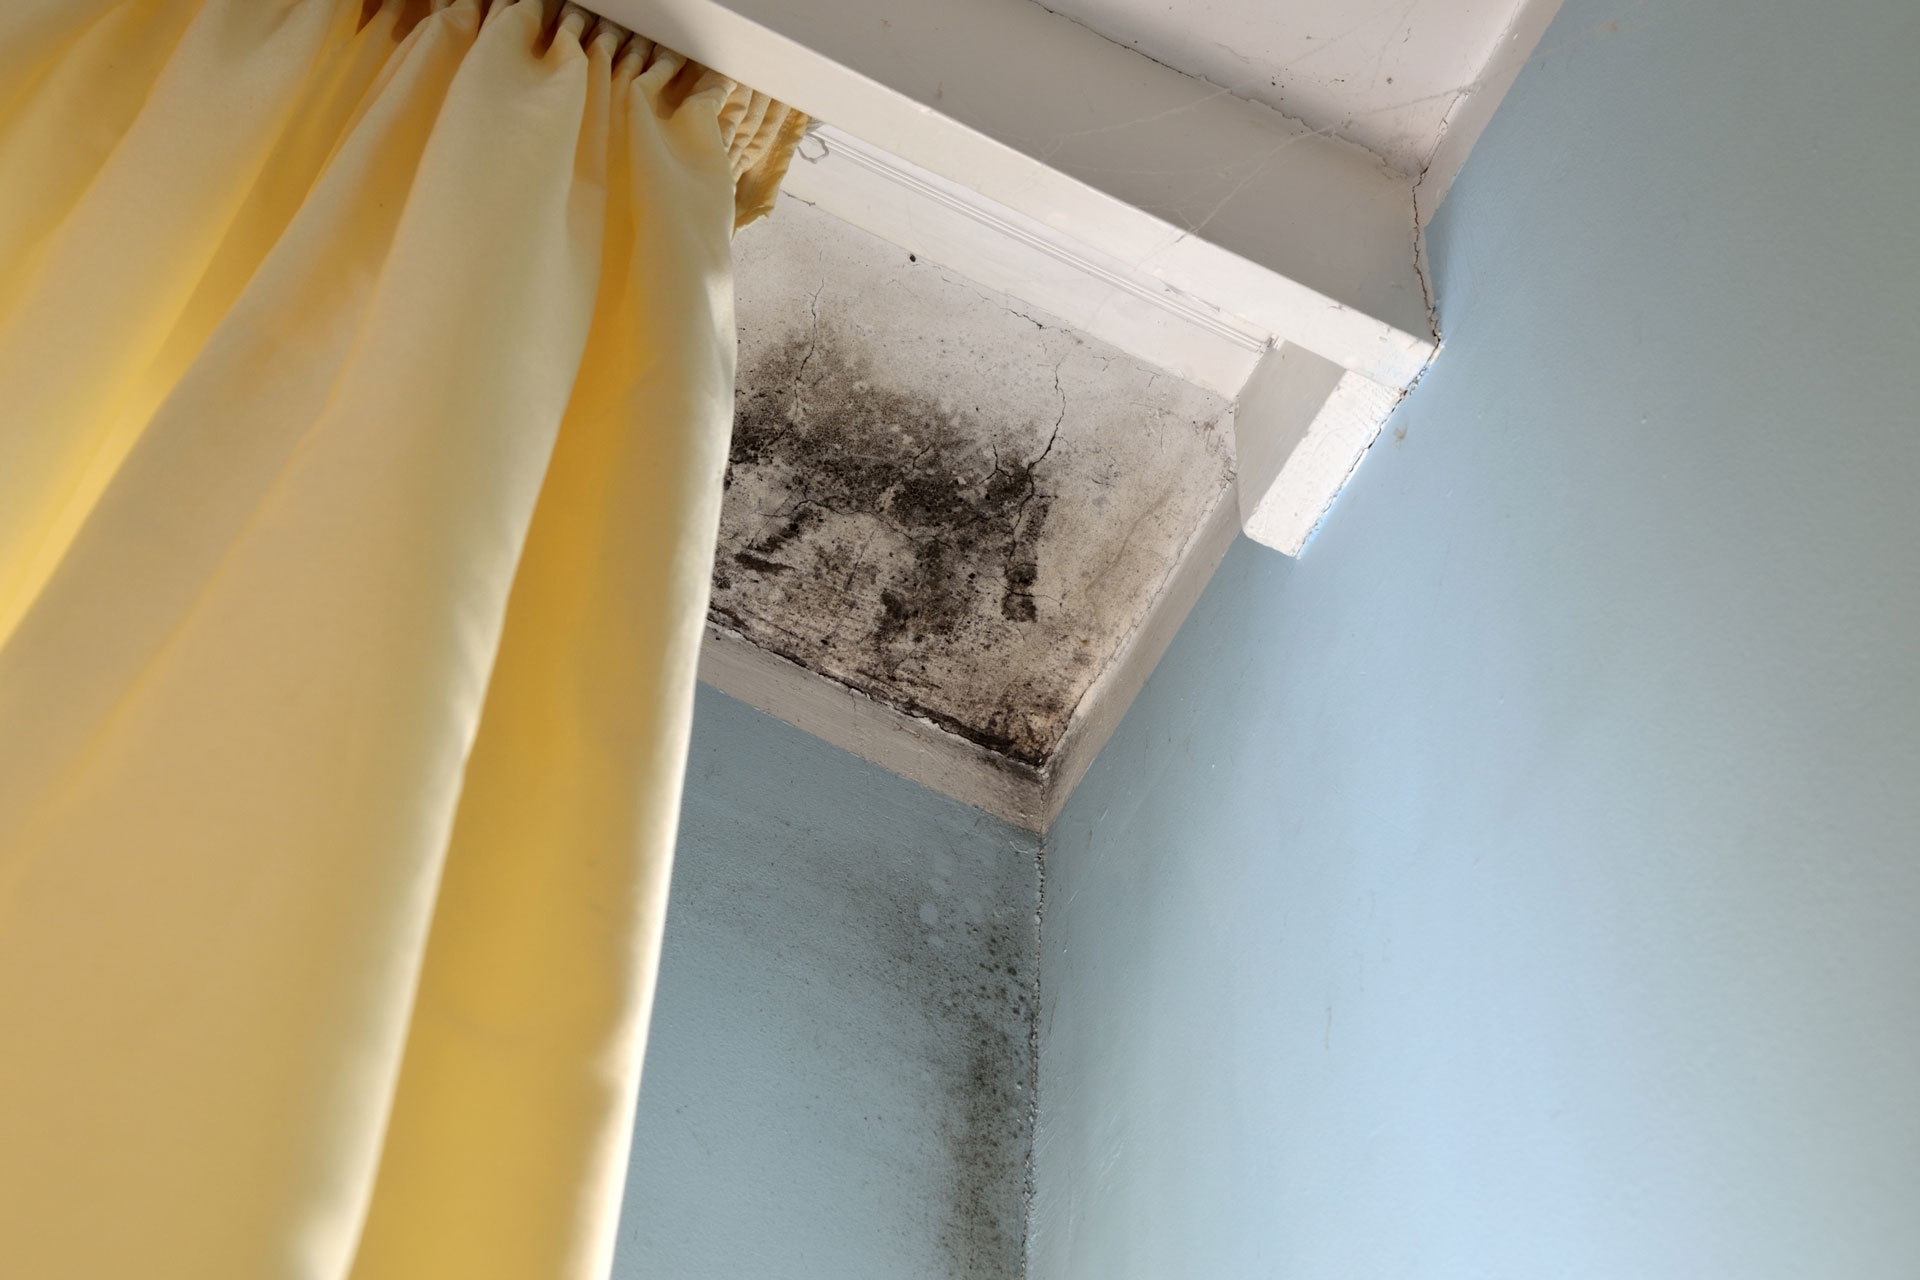 Common Types of Mold That Could Be Hiding in Your Home